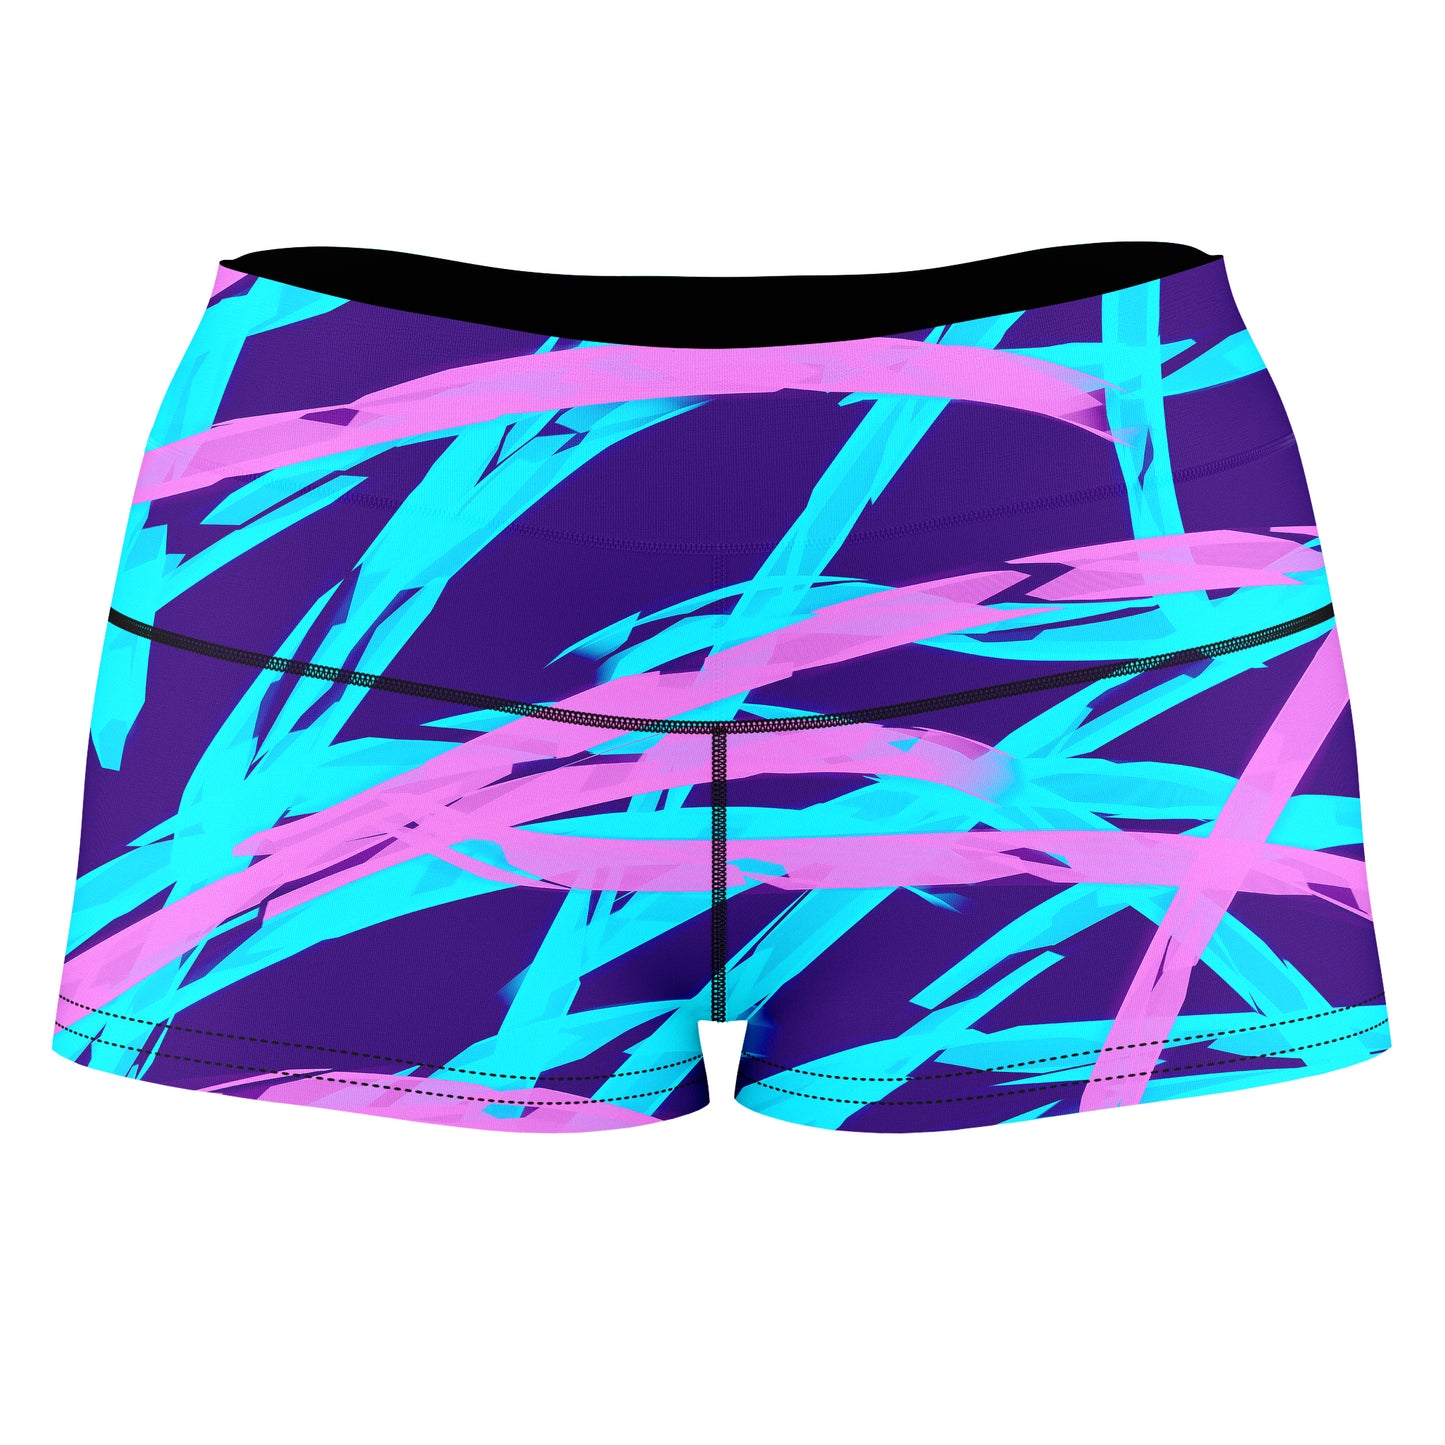 Purple and Blue Rave Abstract High-Waisted Women's Shorts, Big Tex Funkadelic, | iEDM